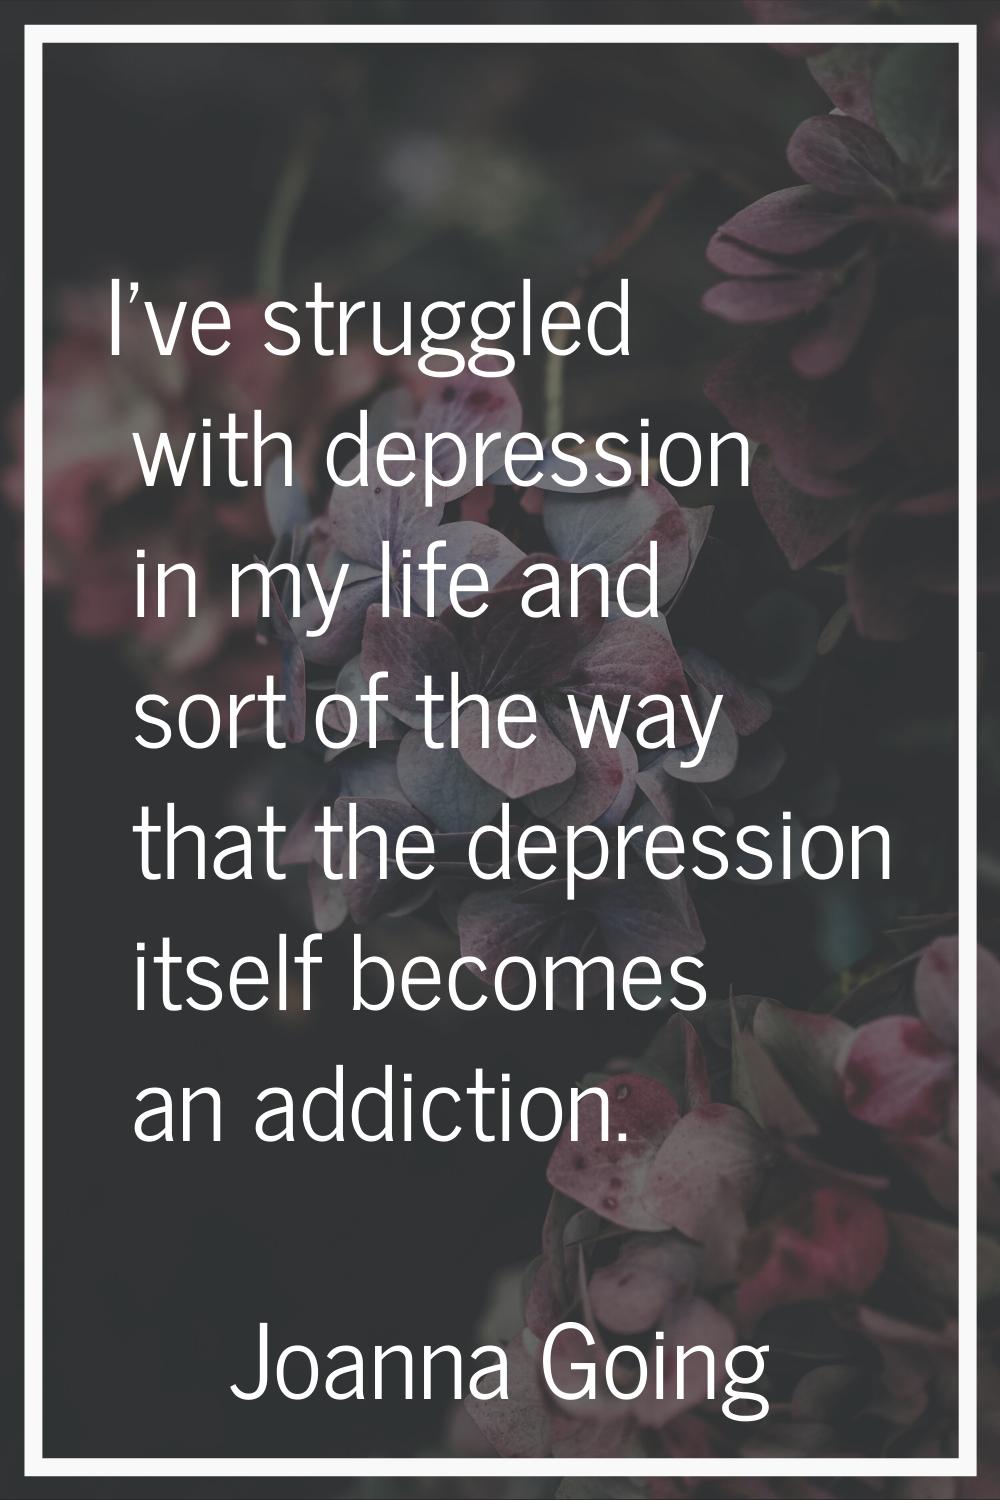 I've struggled with depression in my life and sort of the way that the depression itself becomes an